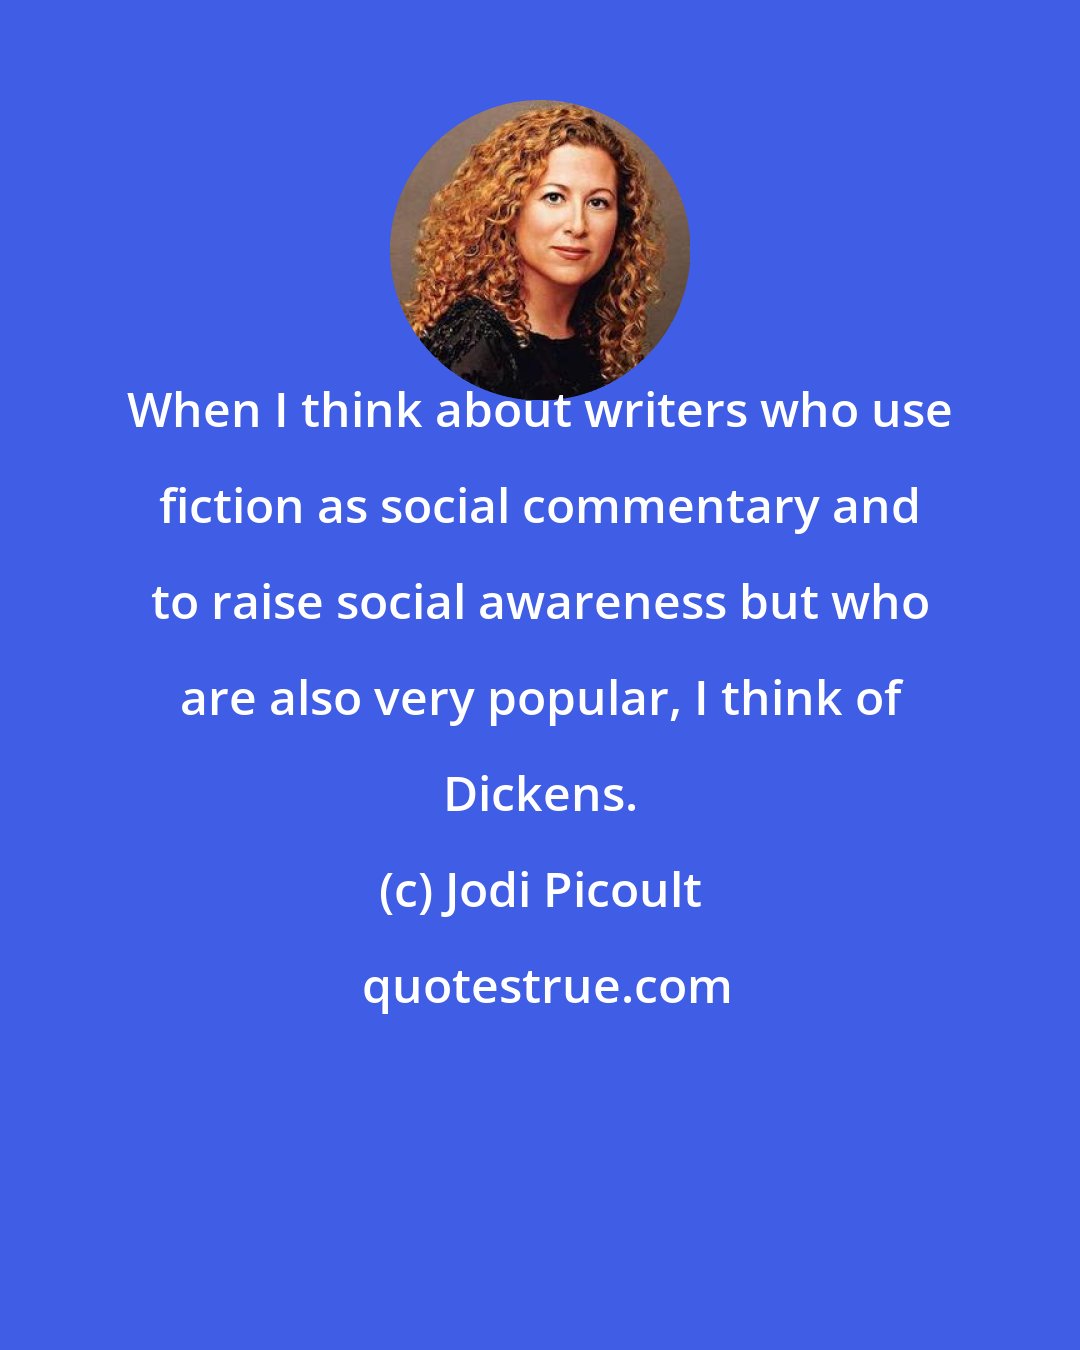 Jodi Picoult: When I think about writers who use fiction as social commentary and to raise social awareness but who are also very popular, I think of Dickens.